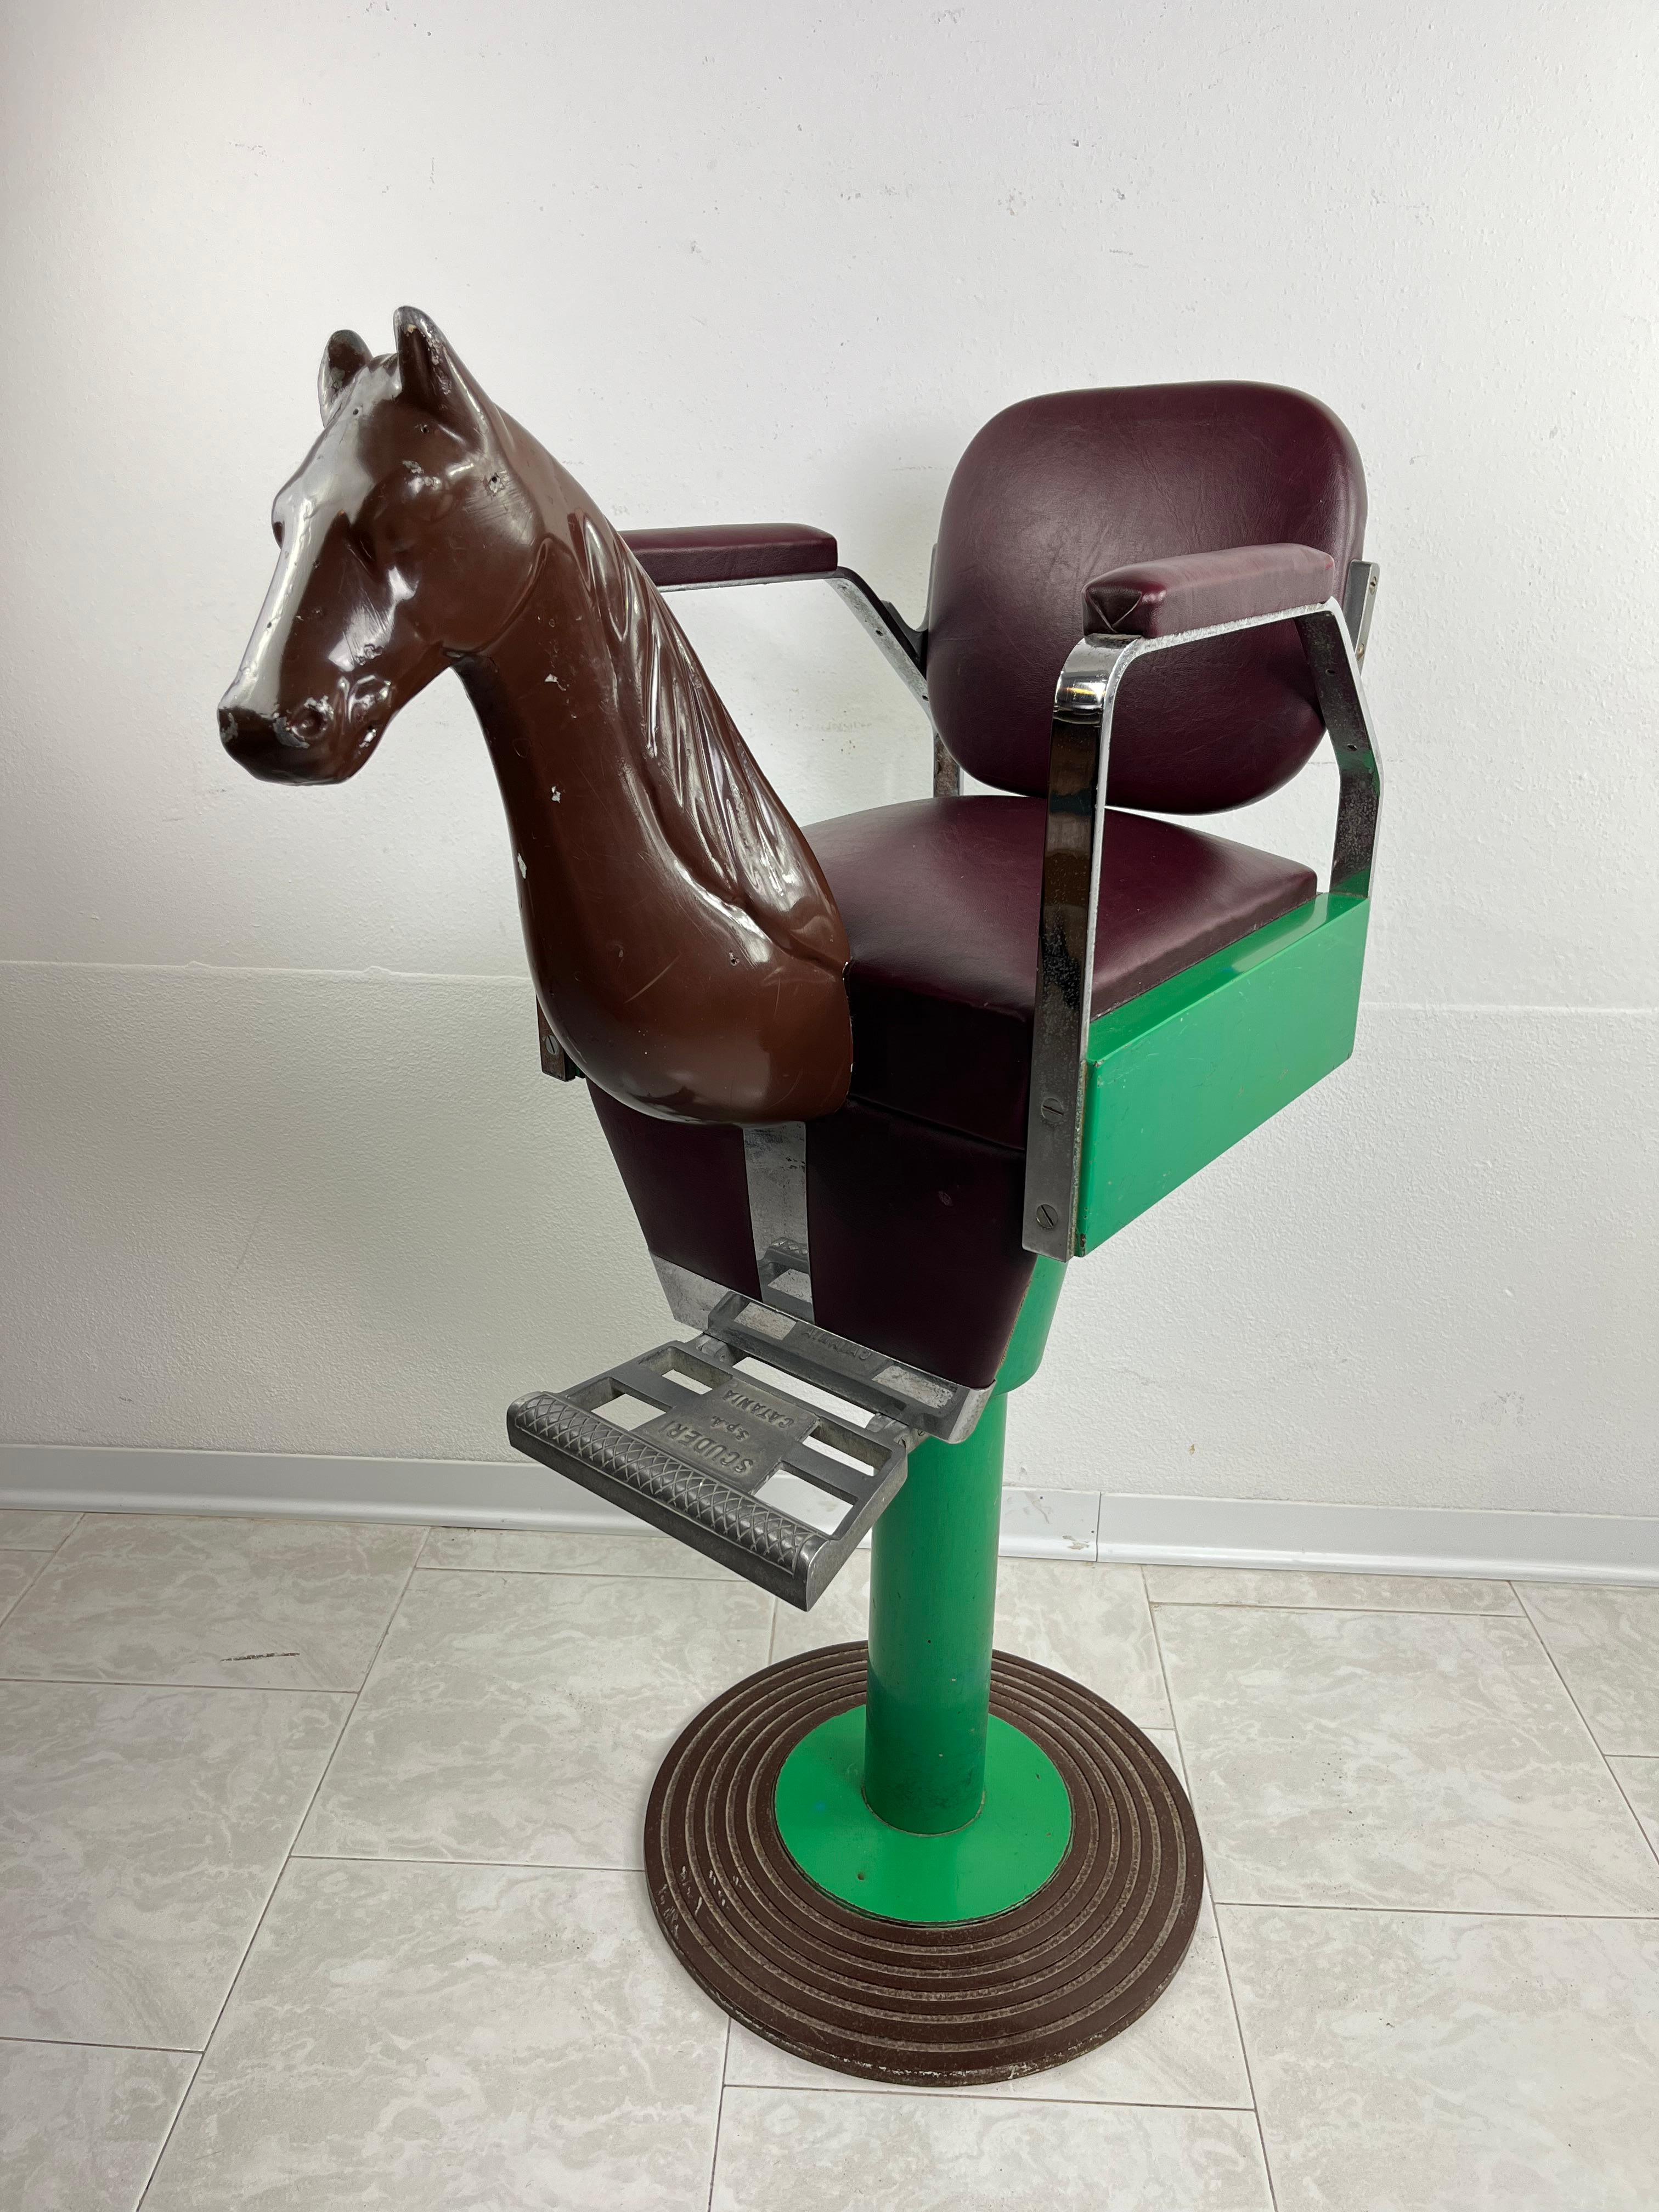 Mid-Century Italian Barber's Chair for Children 1960s
Found in a shaving room, a historic shop in my city,
Made by the Scuderi company of Catania, one of the leading factories for the production of barber chairs. Good condition, small signs of